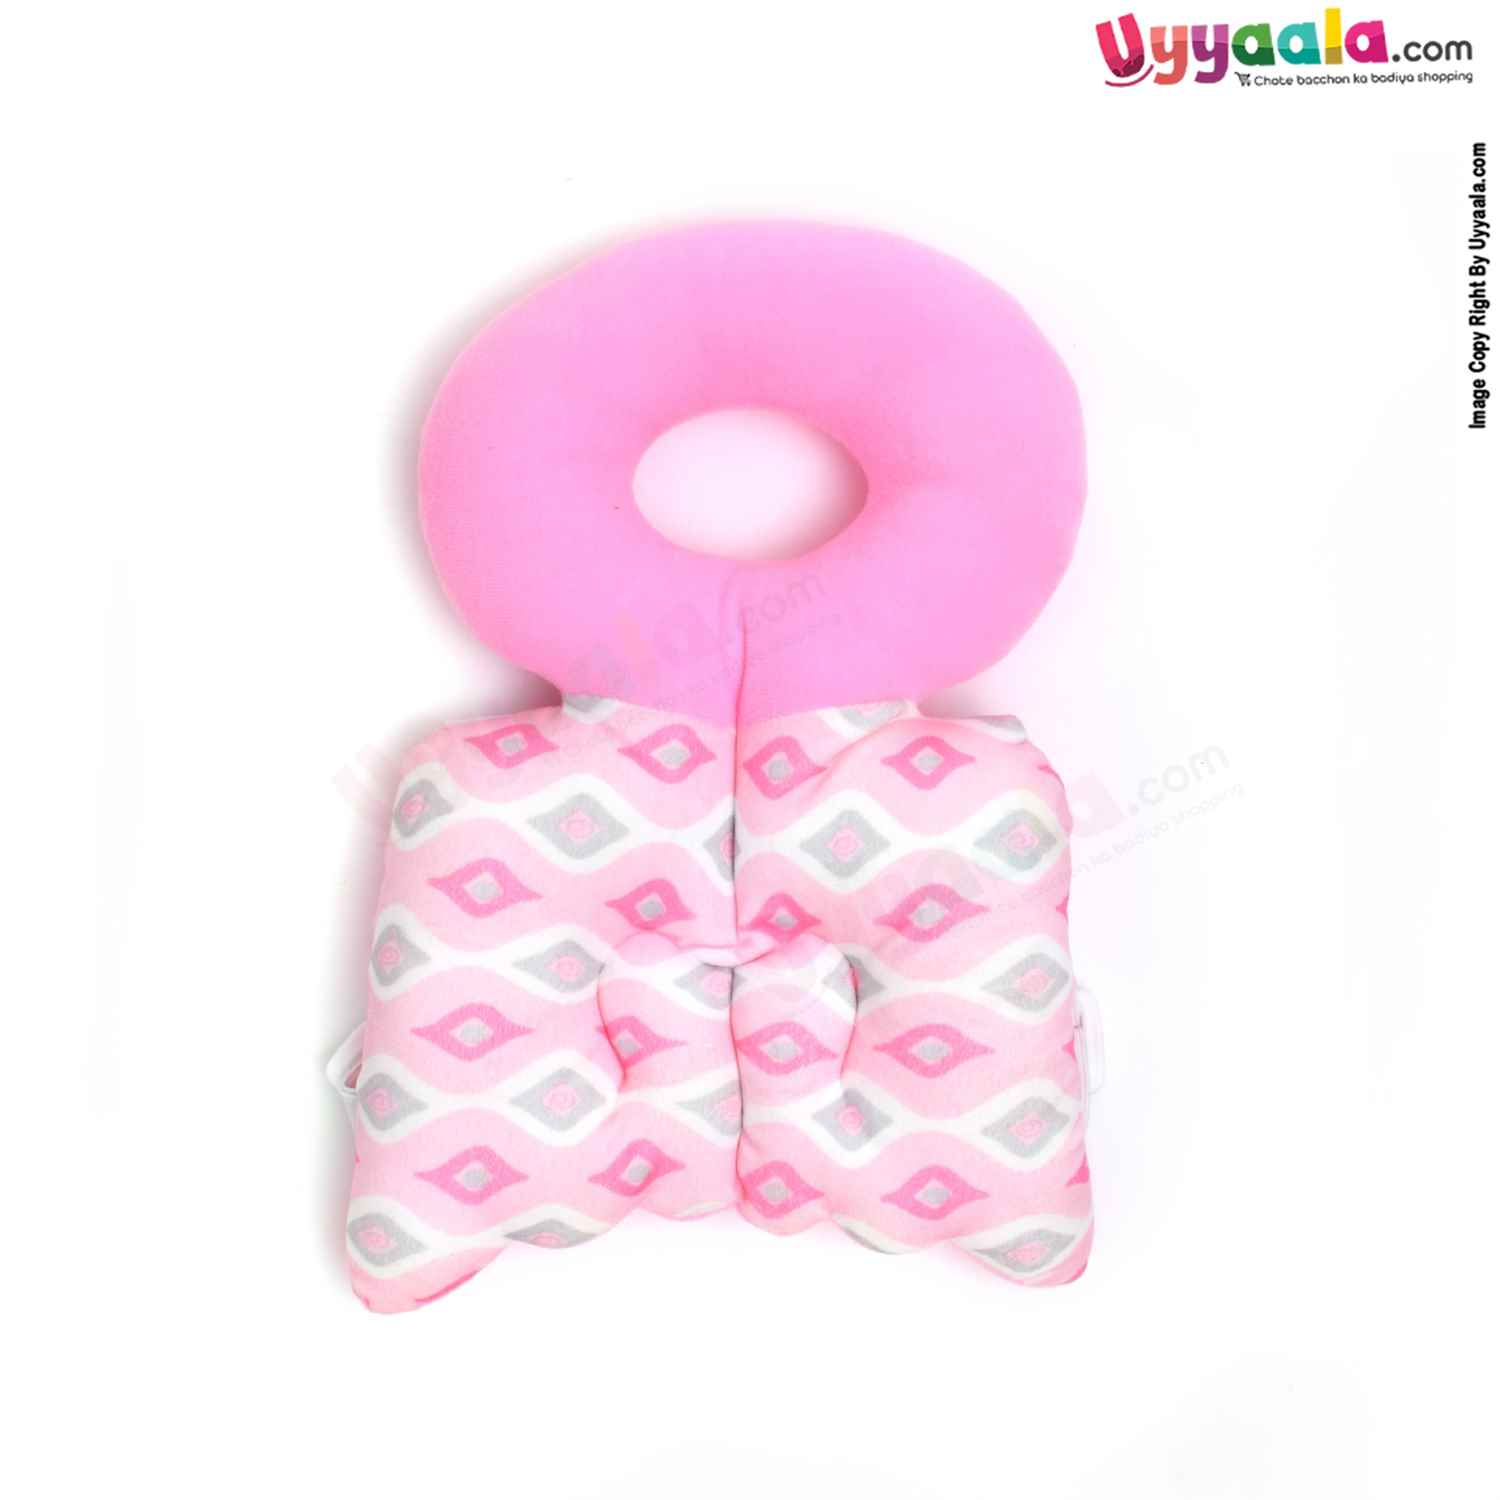 Baby Head Protector with Pillow with Adjustable Straps & Velvet Material, with Print 4-18m Age, Size(32*20cm)